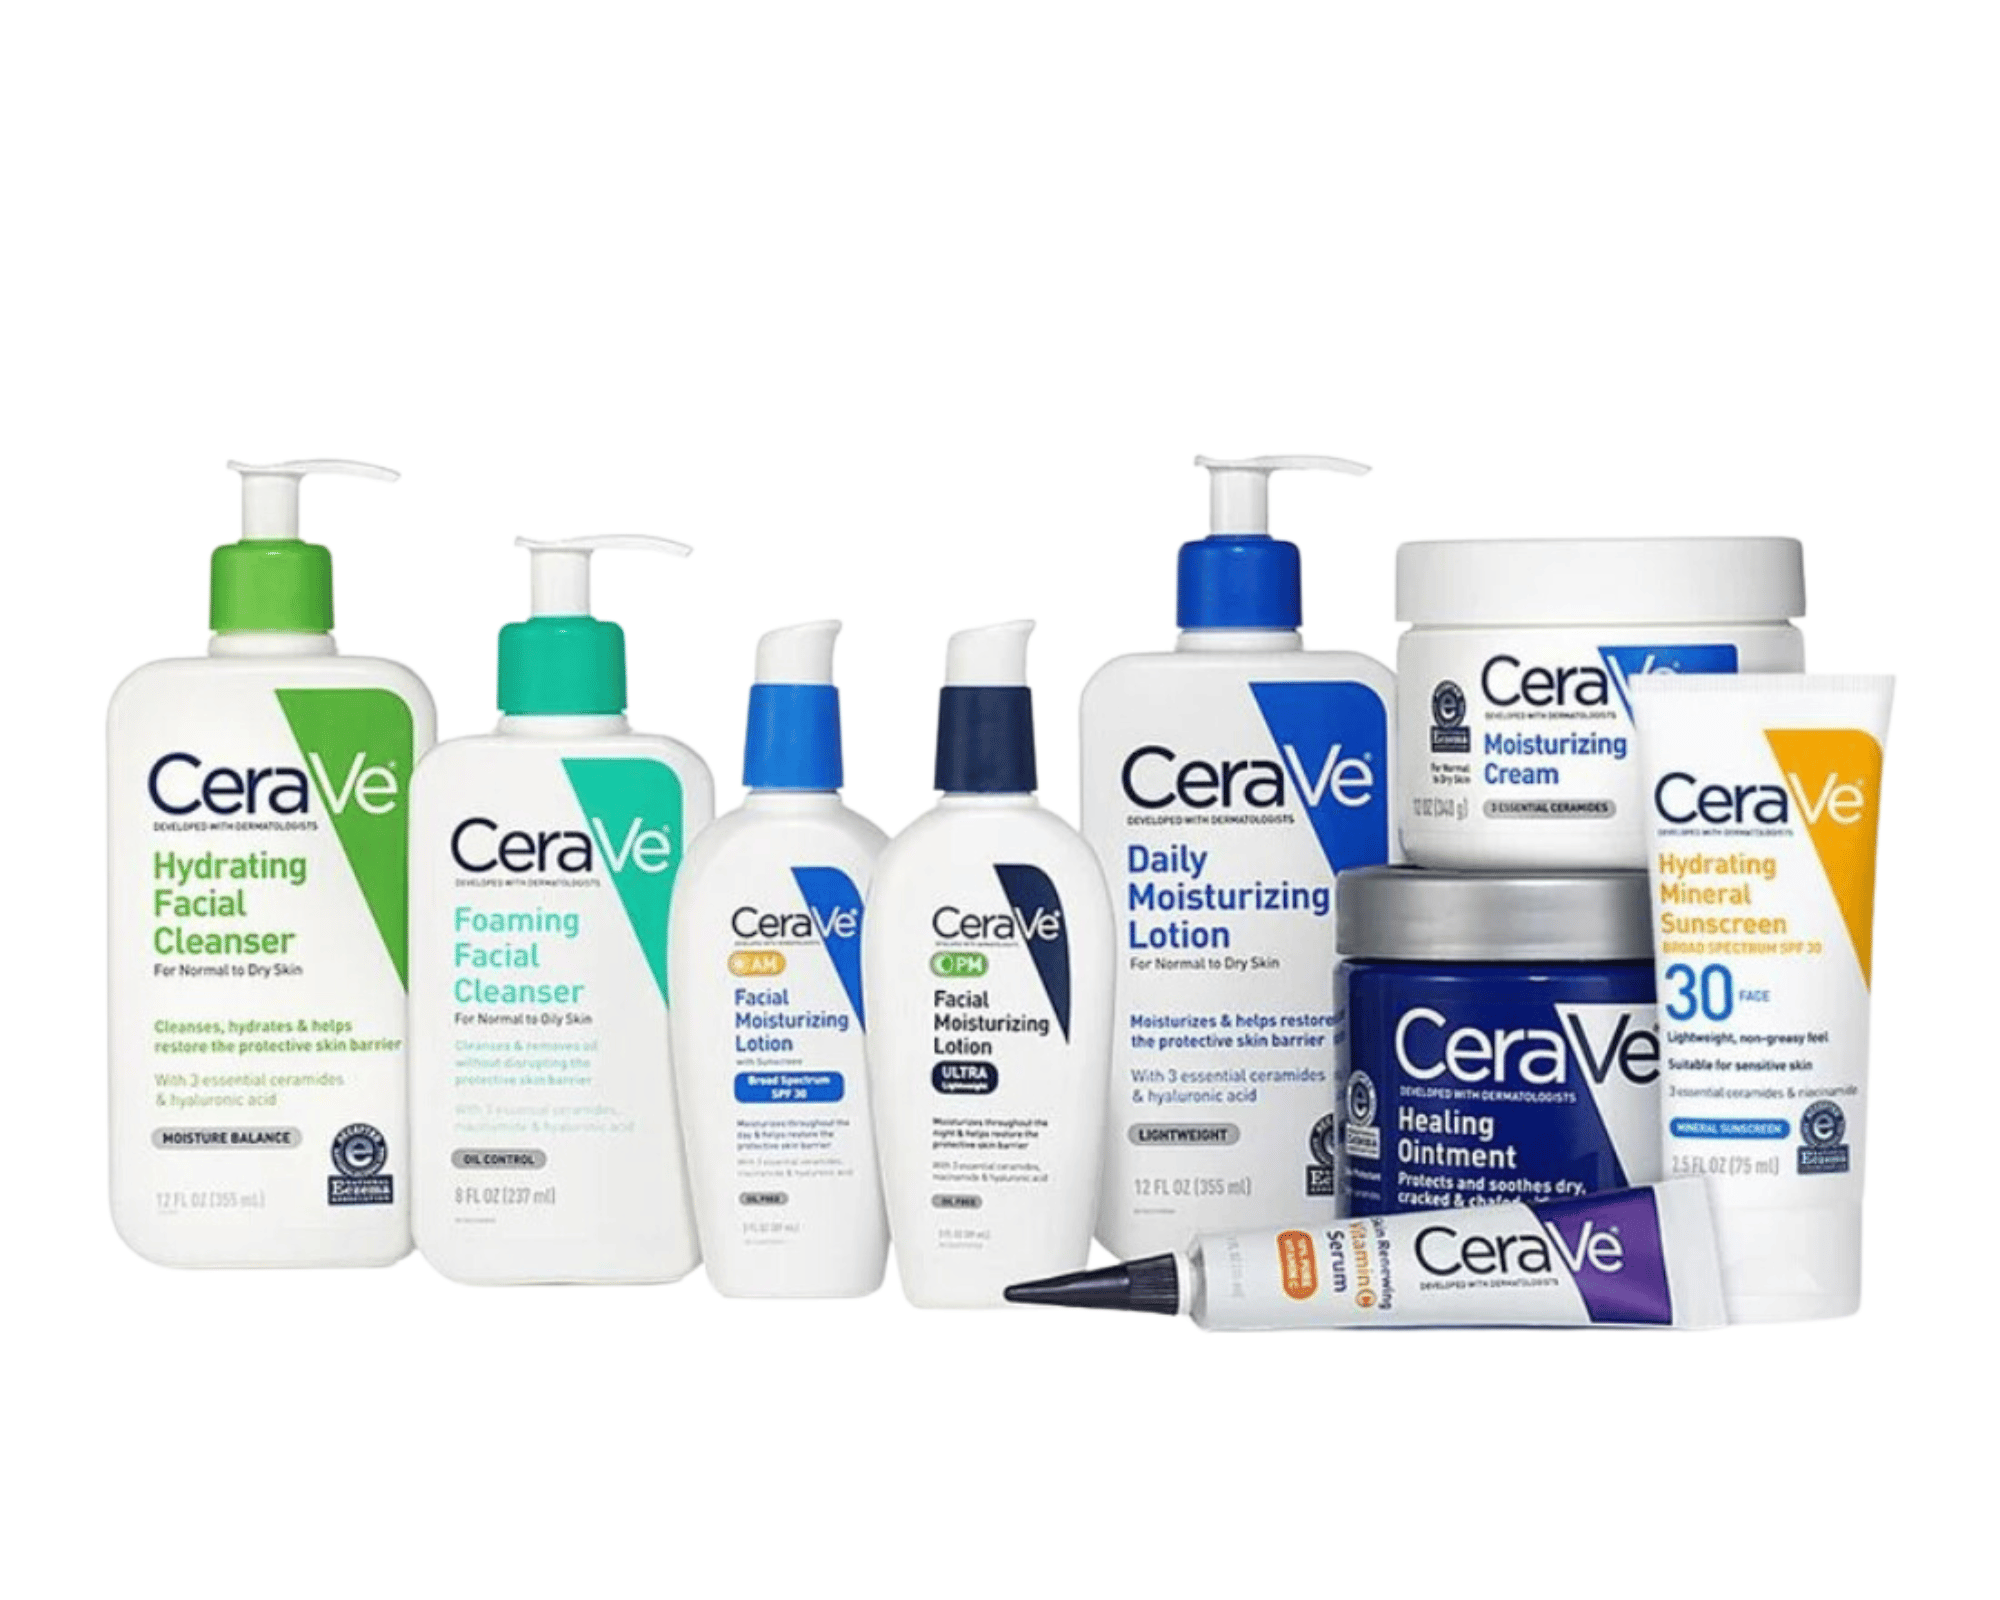 Does Cerave Cause Cancer